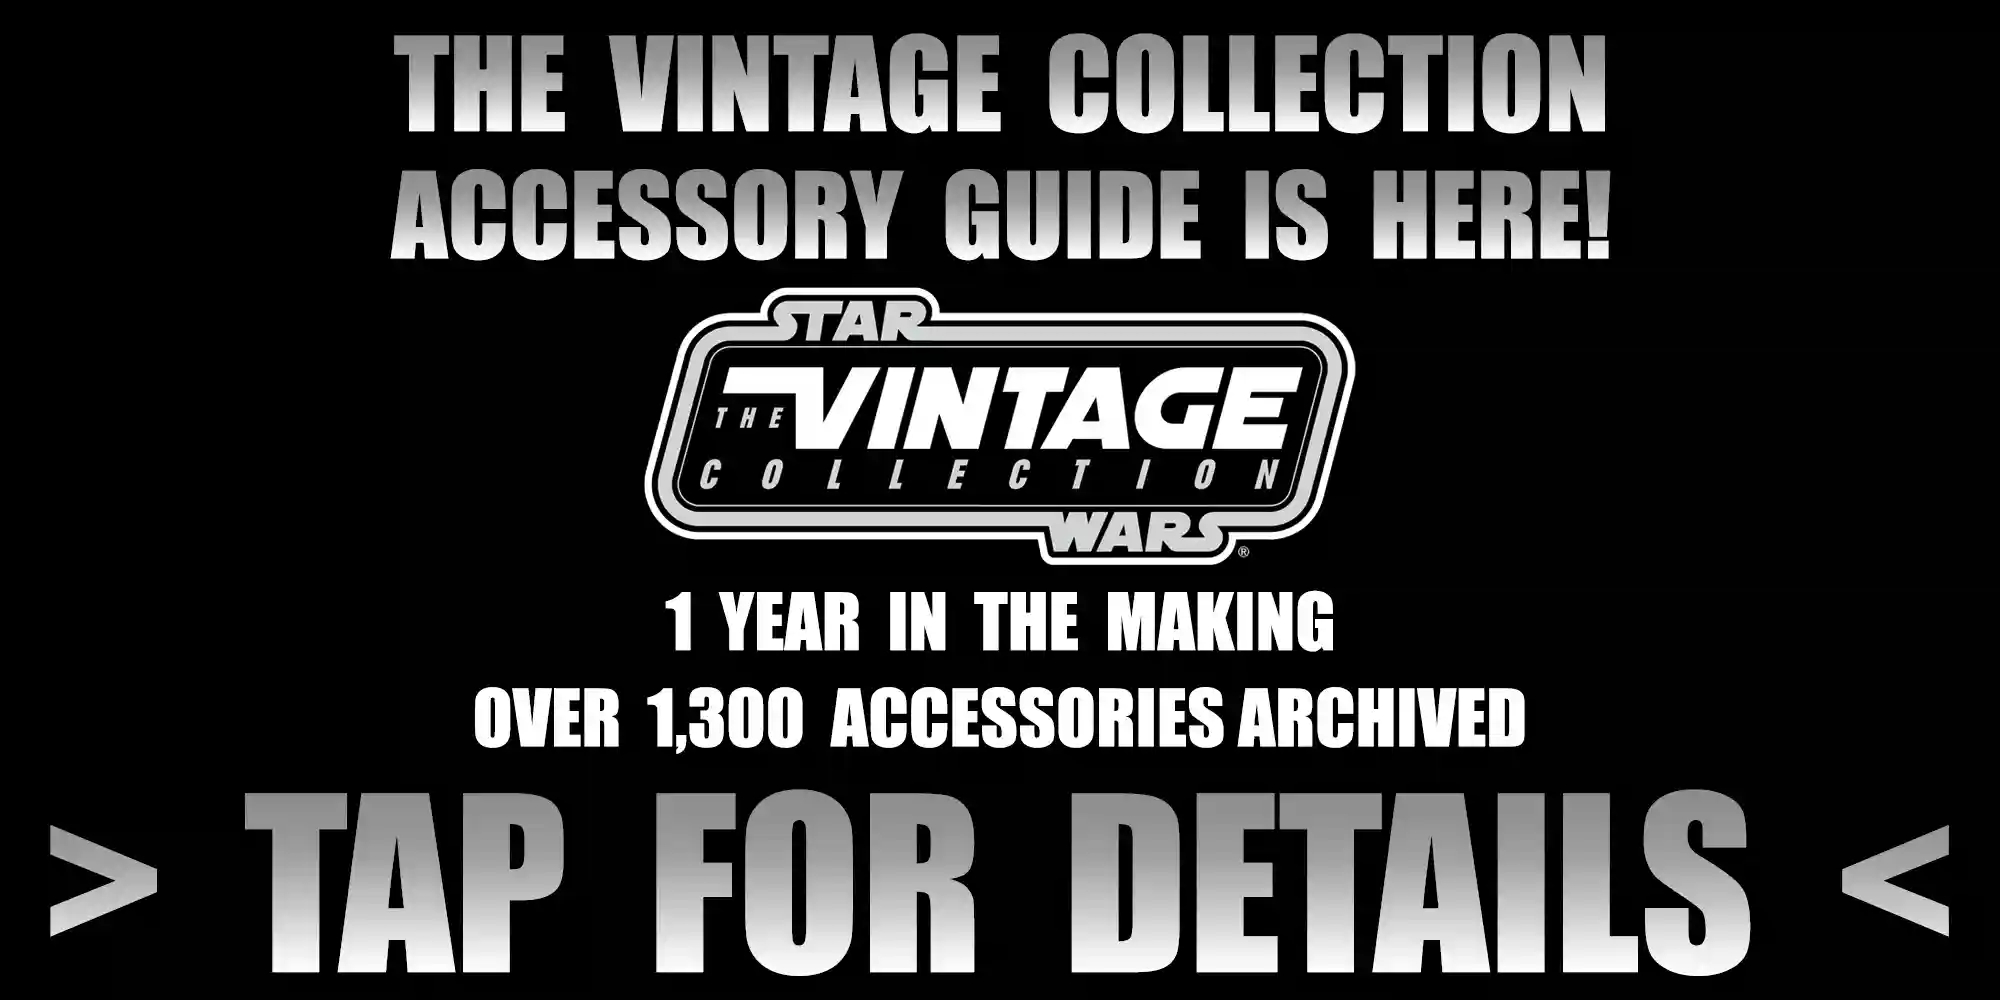 The Vintage Collection Accessory Guide